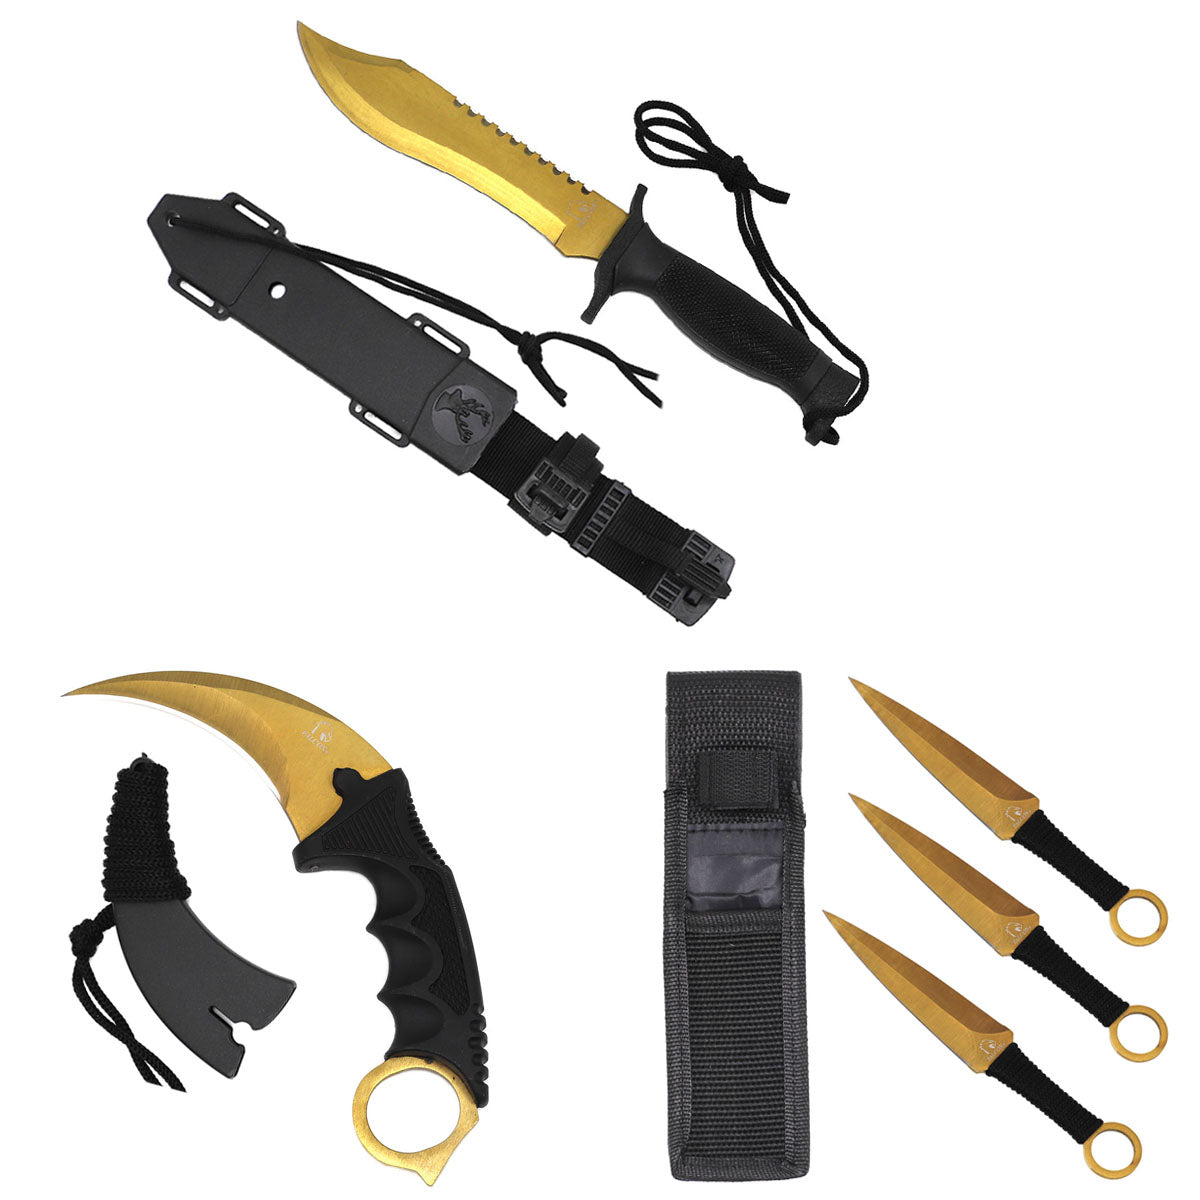 falcon-hunting-knives-3-piece-set-gold